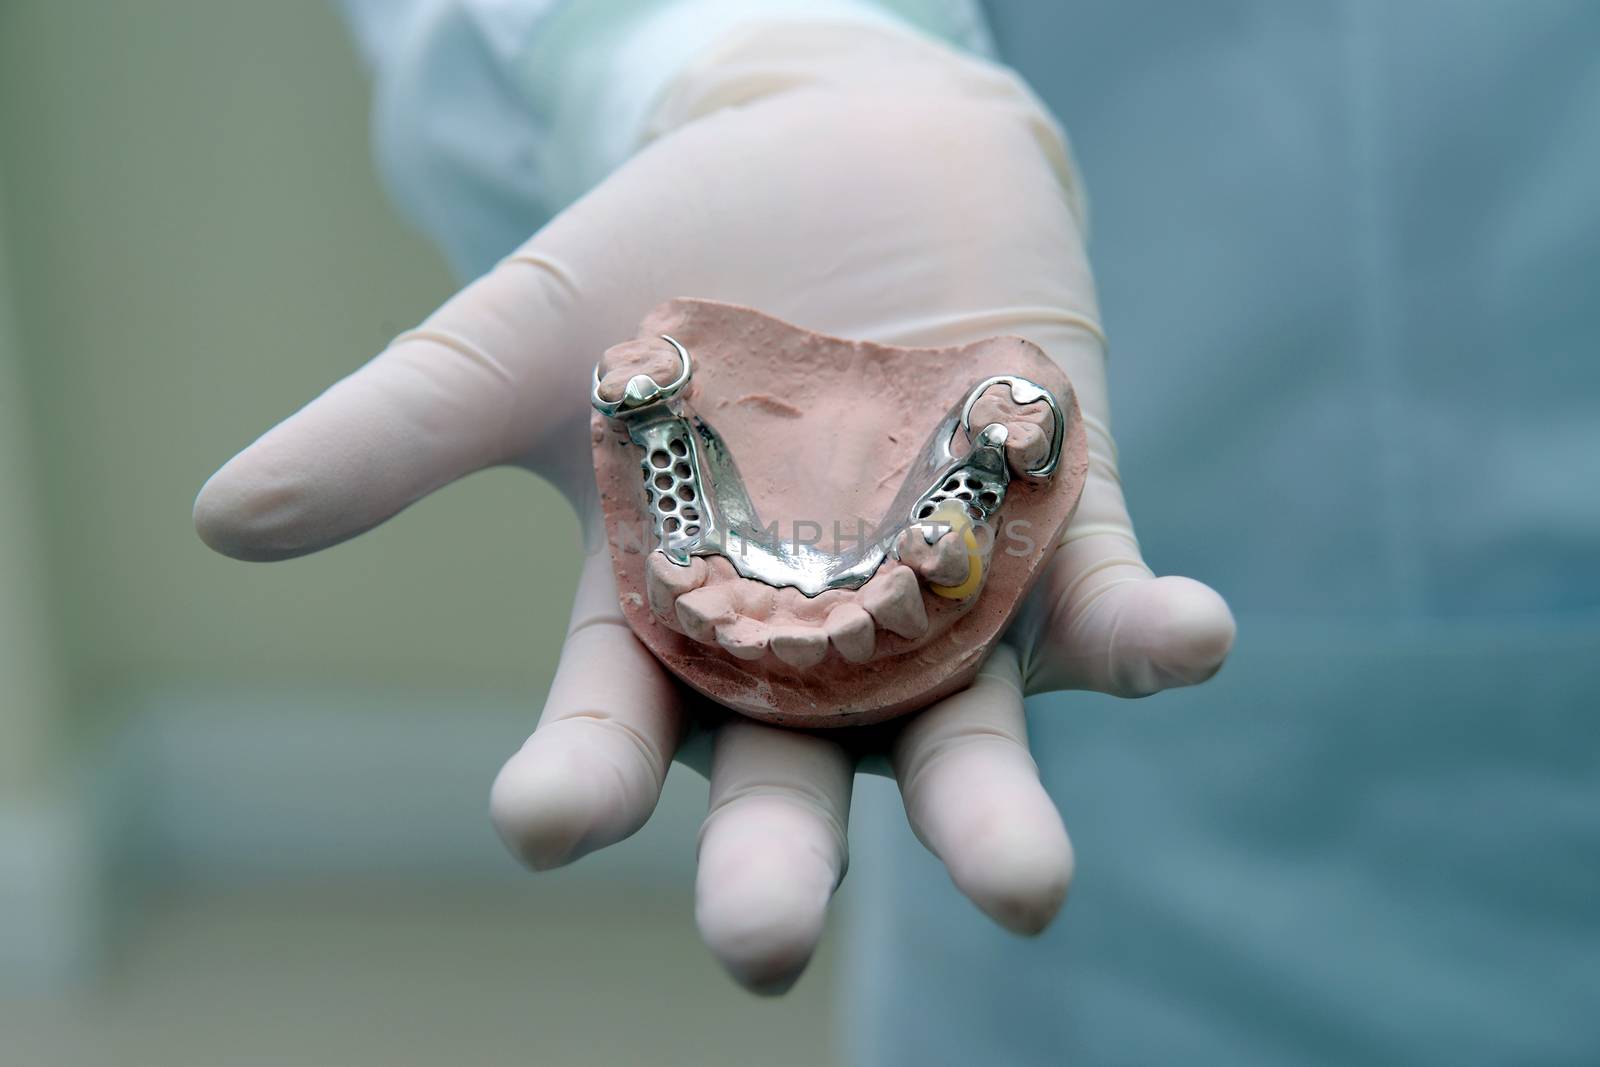 Dentistry show denture in hand.